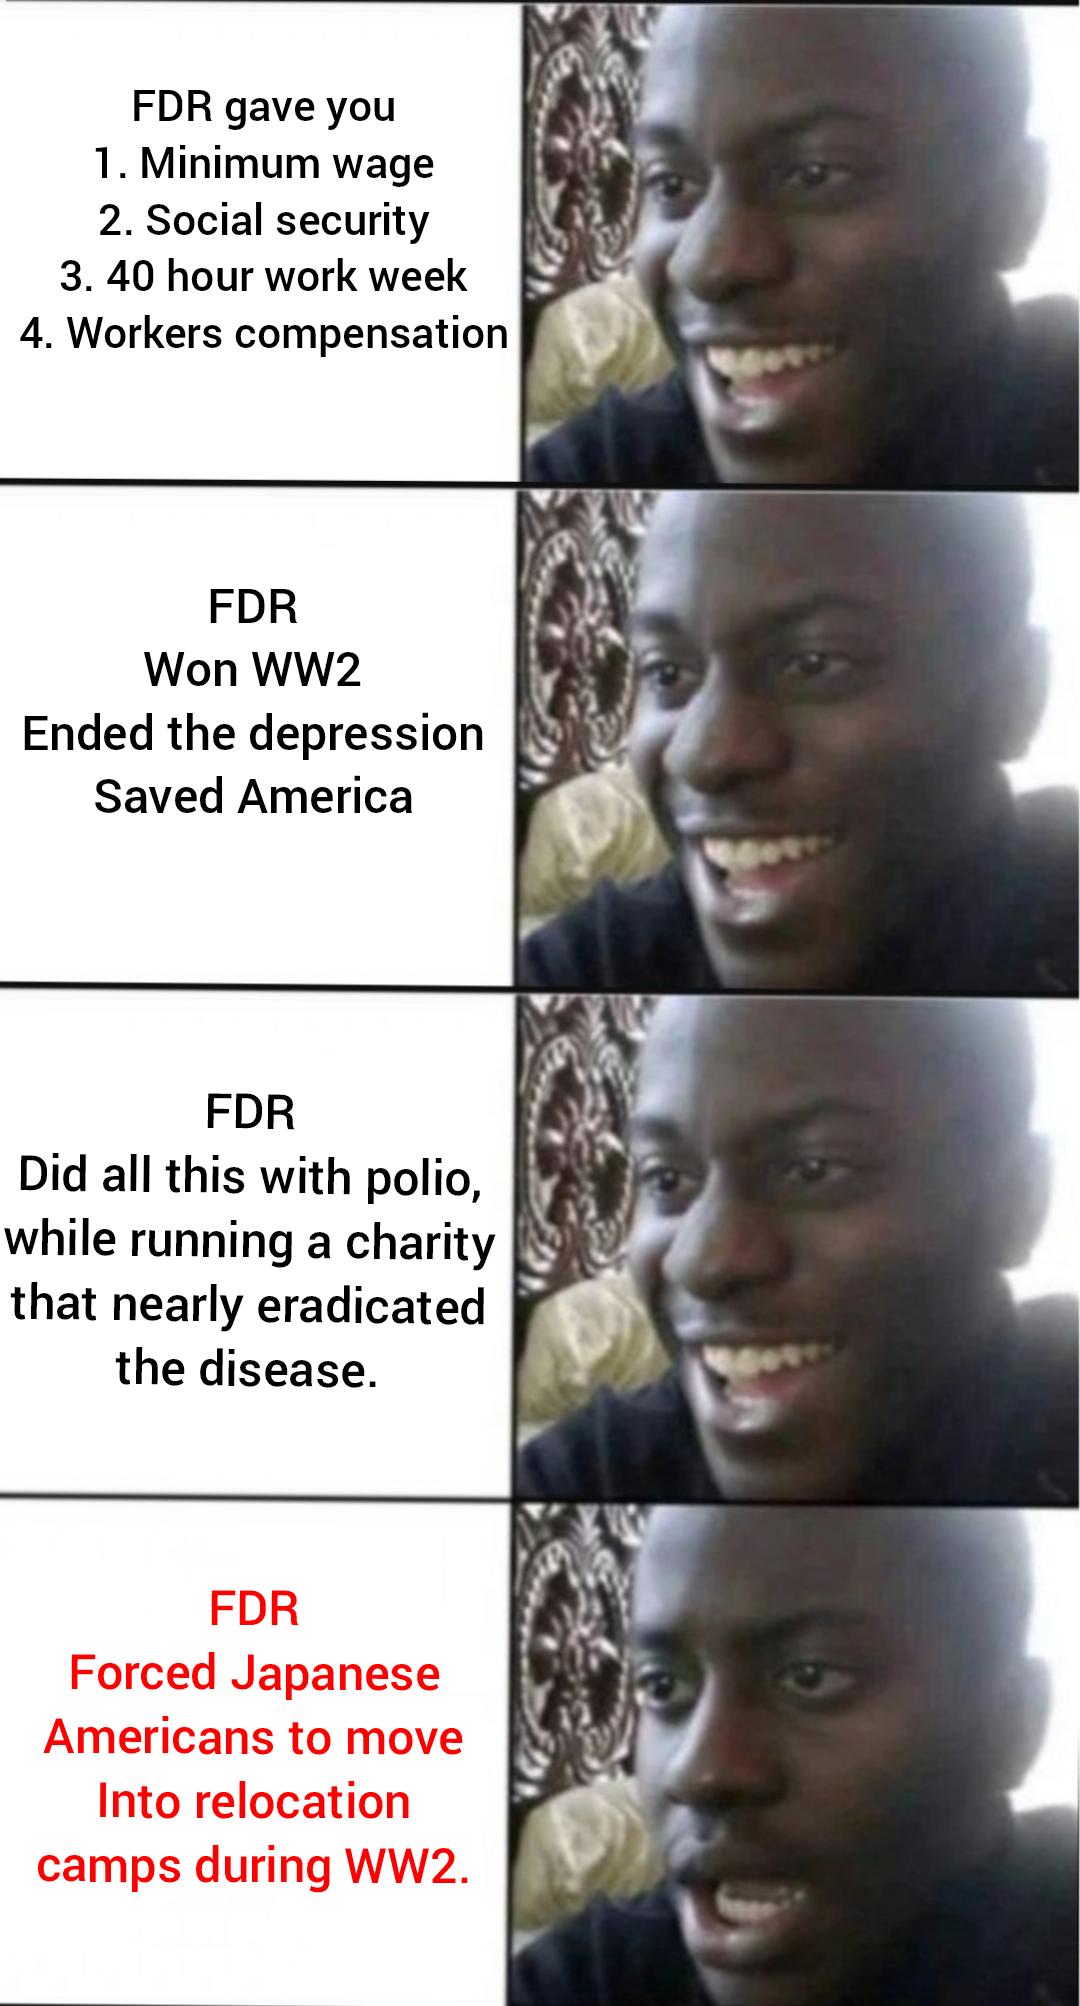 FDR the good/bad